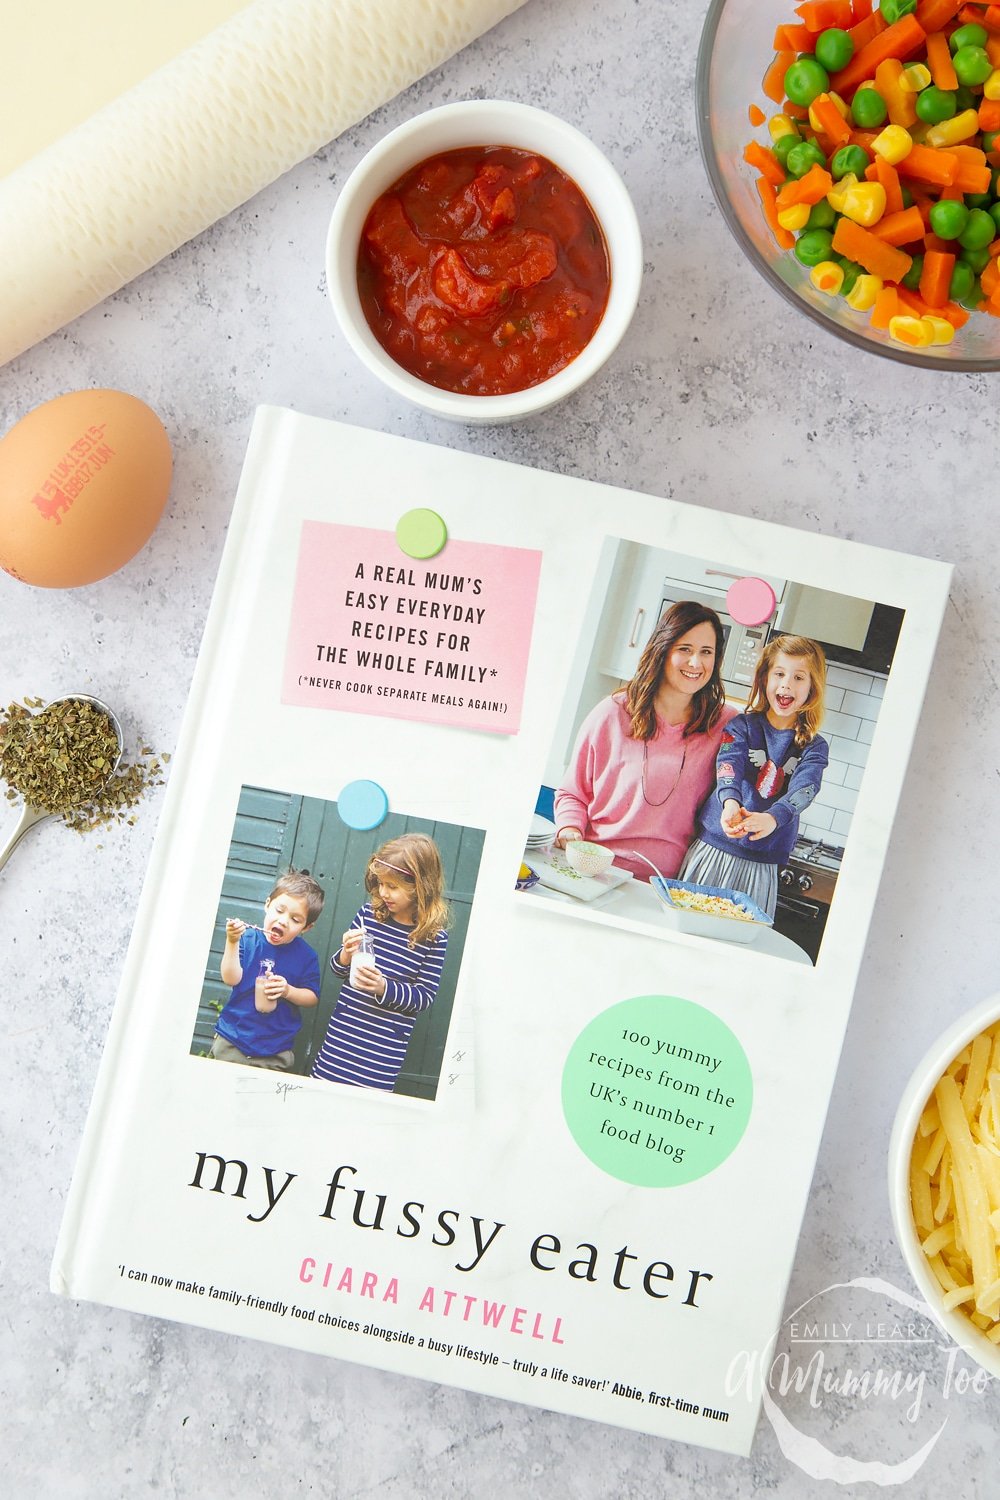 My Fussy Eater by Ciara Attwell, a new recipe book by the wonderful food blogger Ciara Attwell